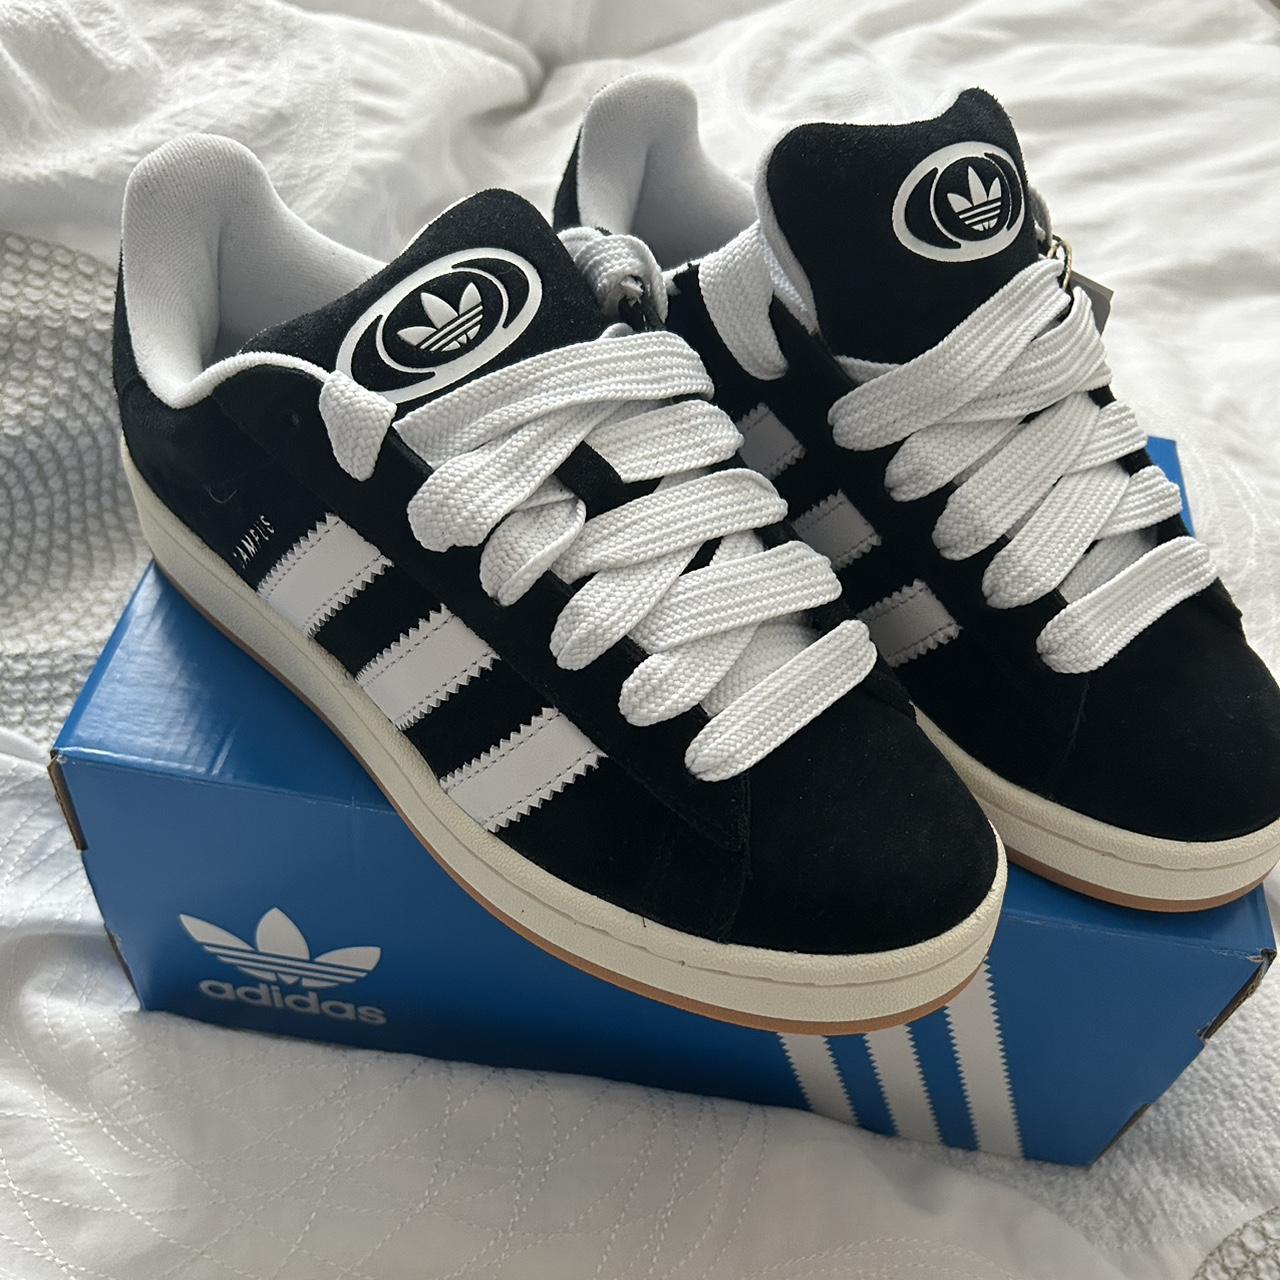 Adidas Campus 00‘s I got these in sizes 39 1/3 (uk... - Depop